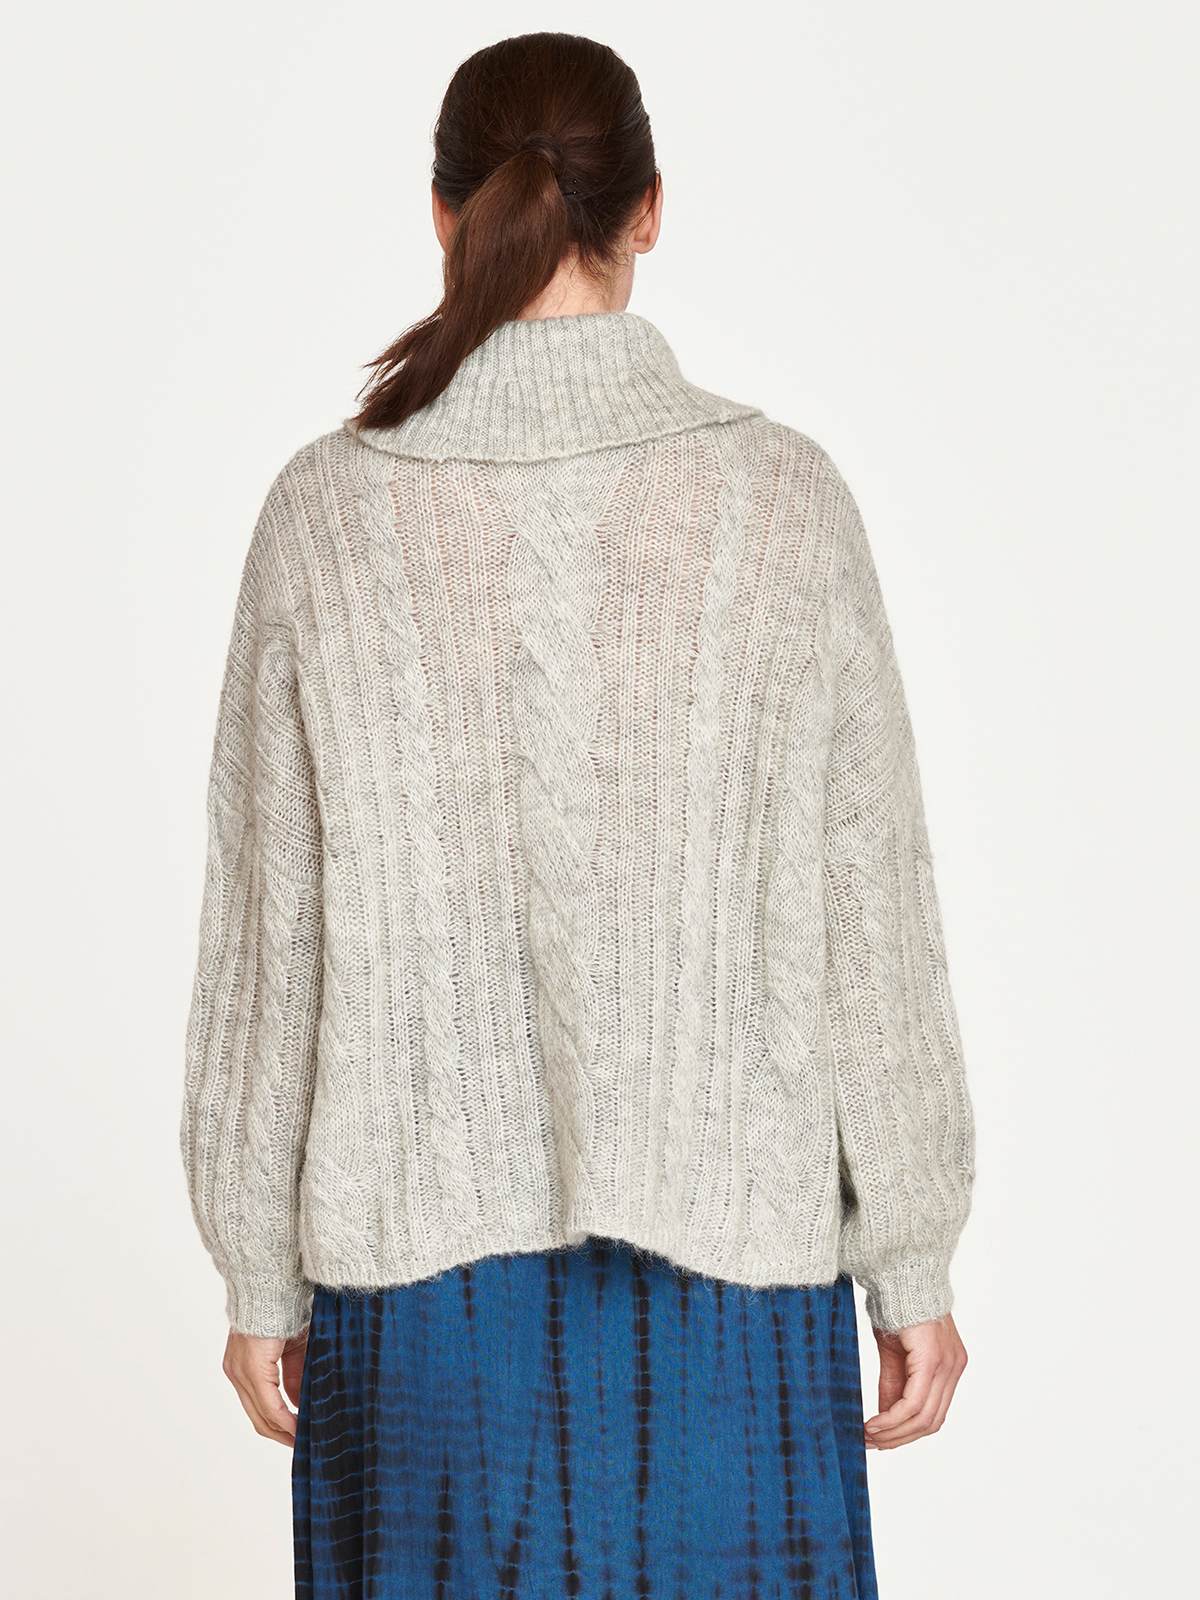 curate, thought apparel, ethically made and sustainable womens luxury apparel, lailia wool cable knit sweater in moonlight grey, women's knitwear and sweater